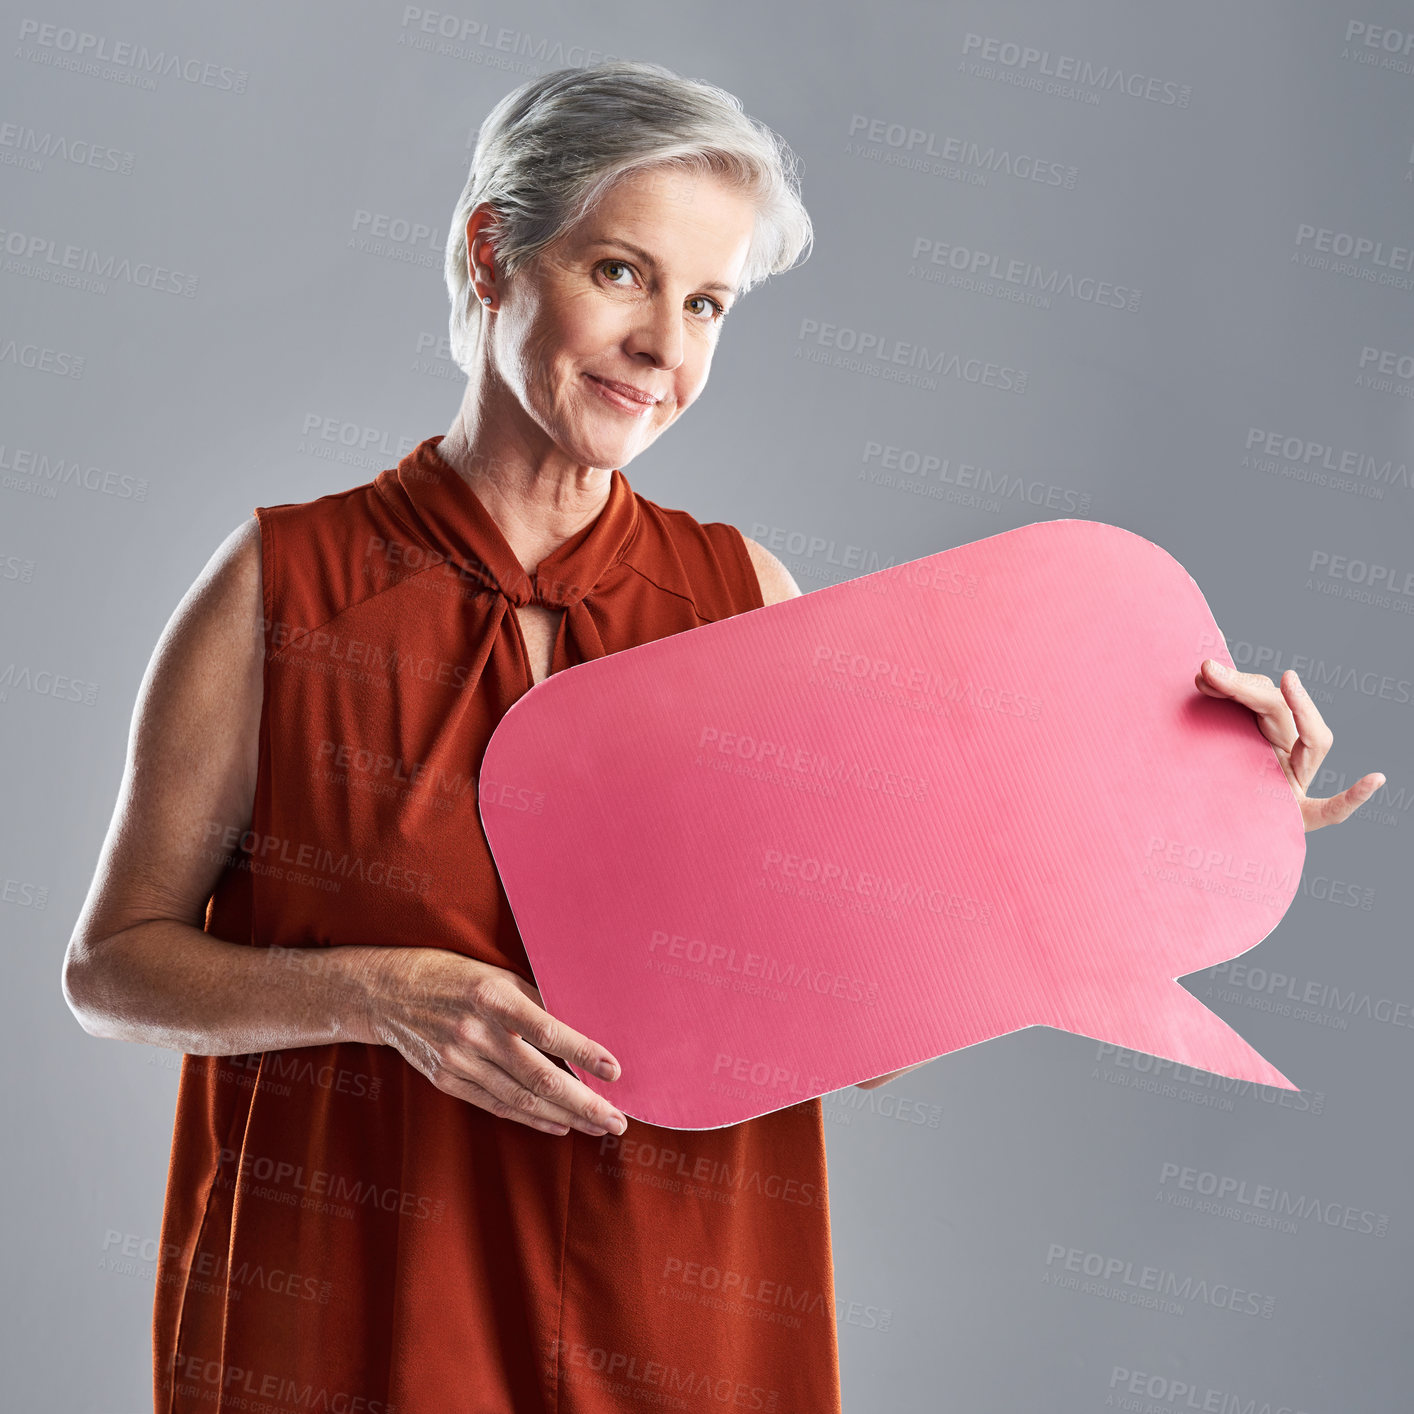 Buy stock photo Portrait of a mature woman holding a speech bubble against a grey background